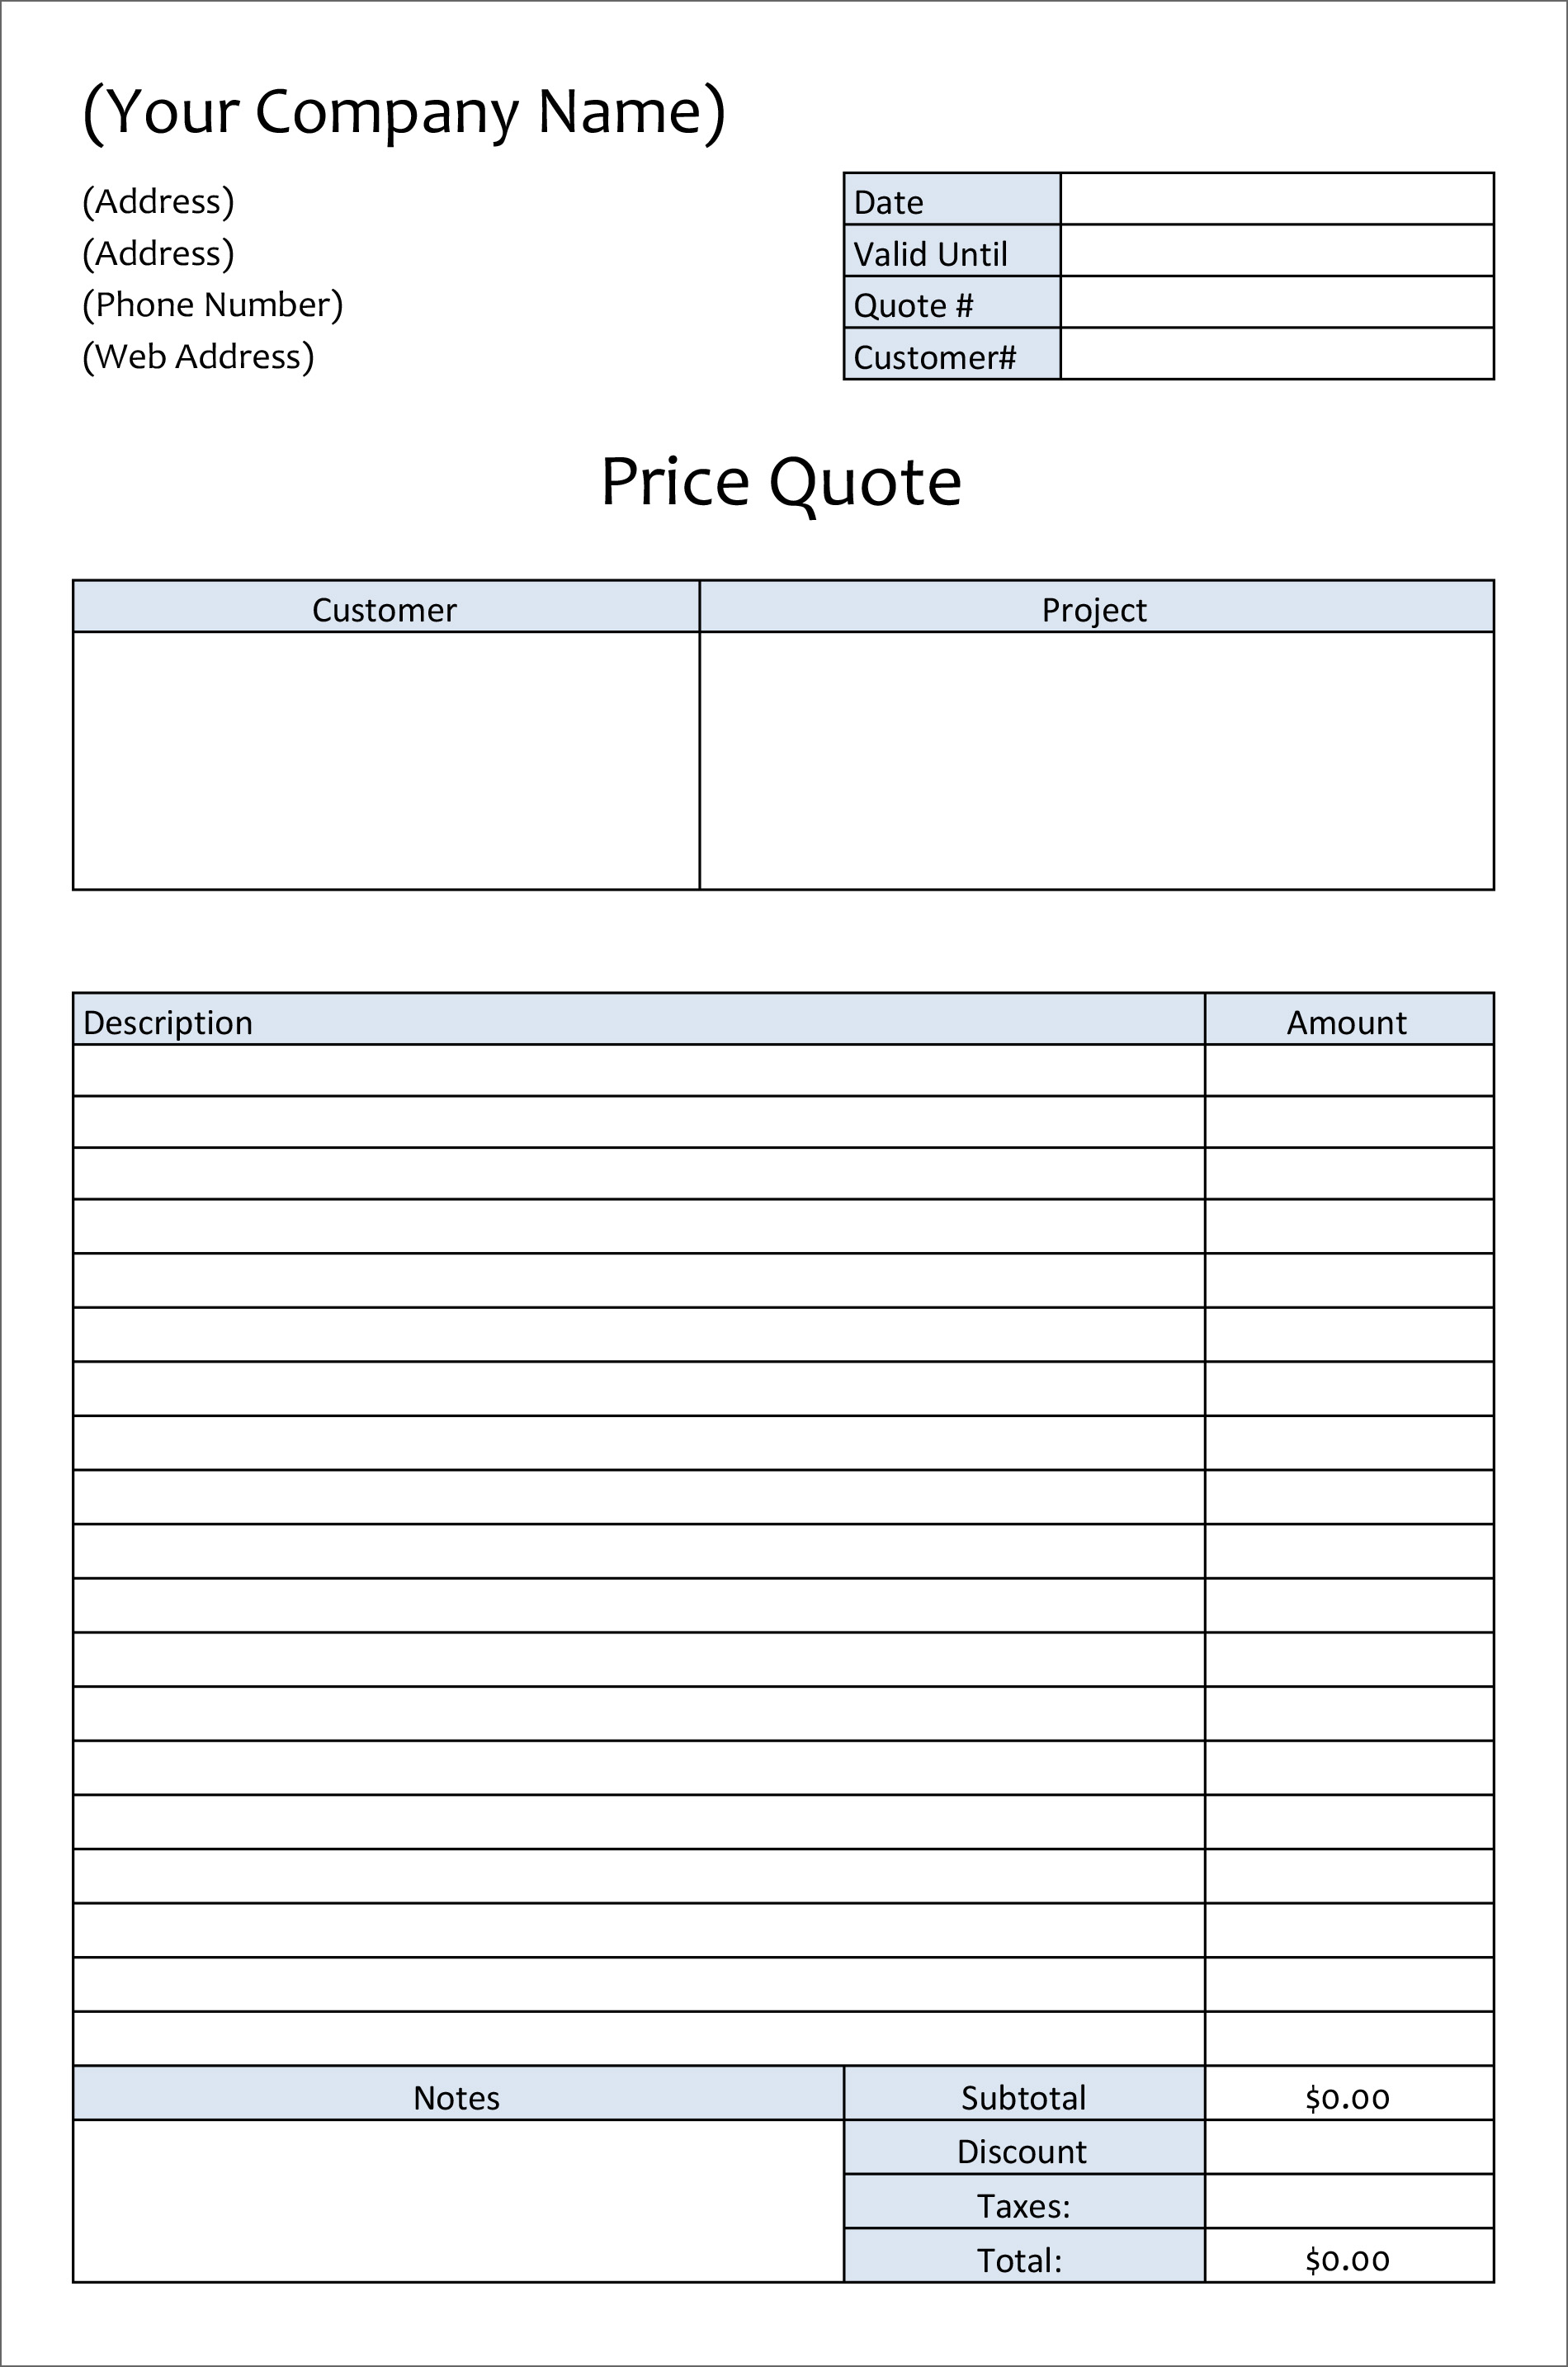 23-free-templates-for-price-estimations-service-bids-and-sales-quotations